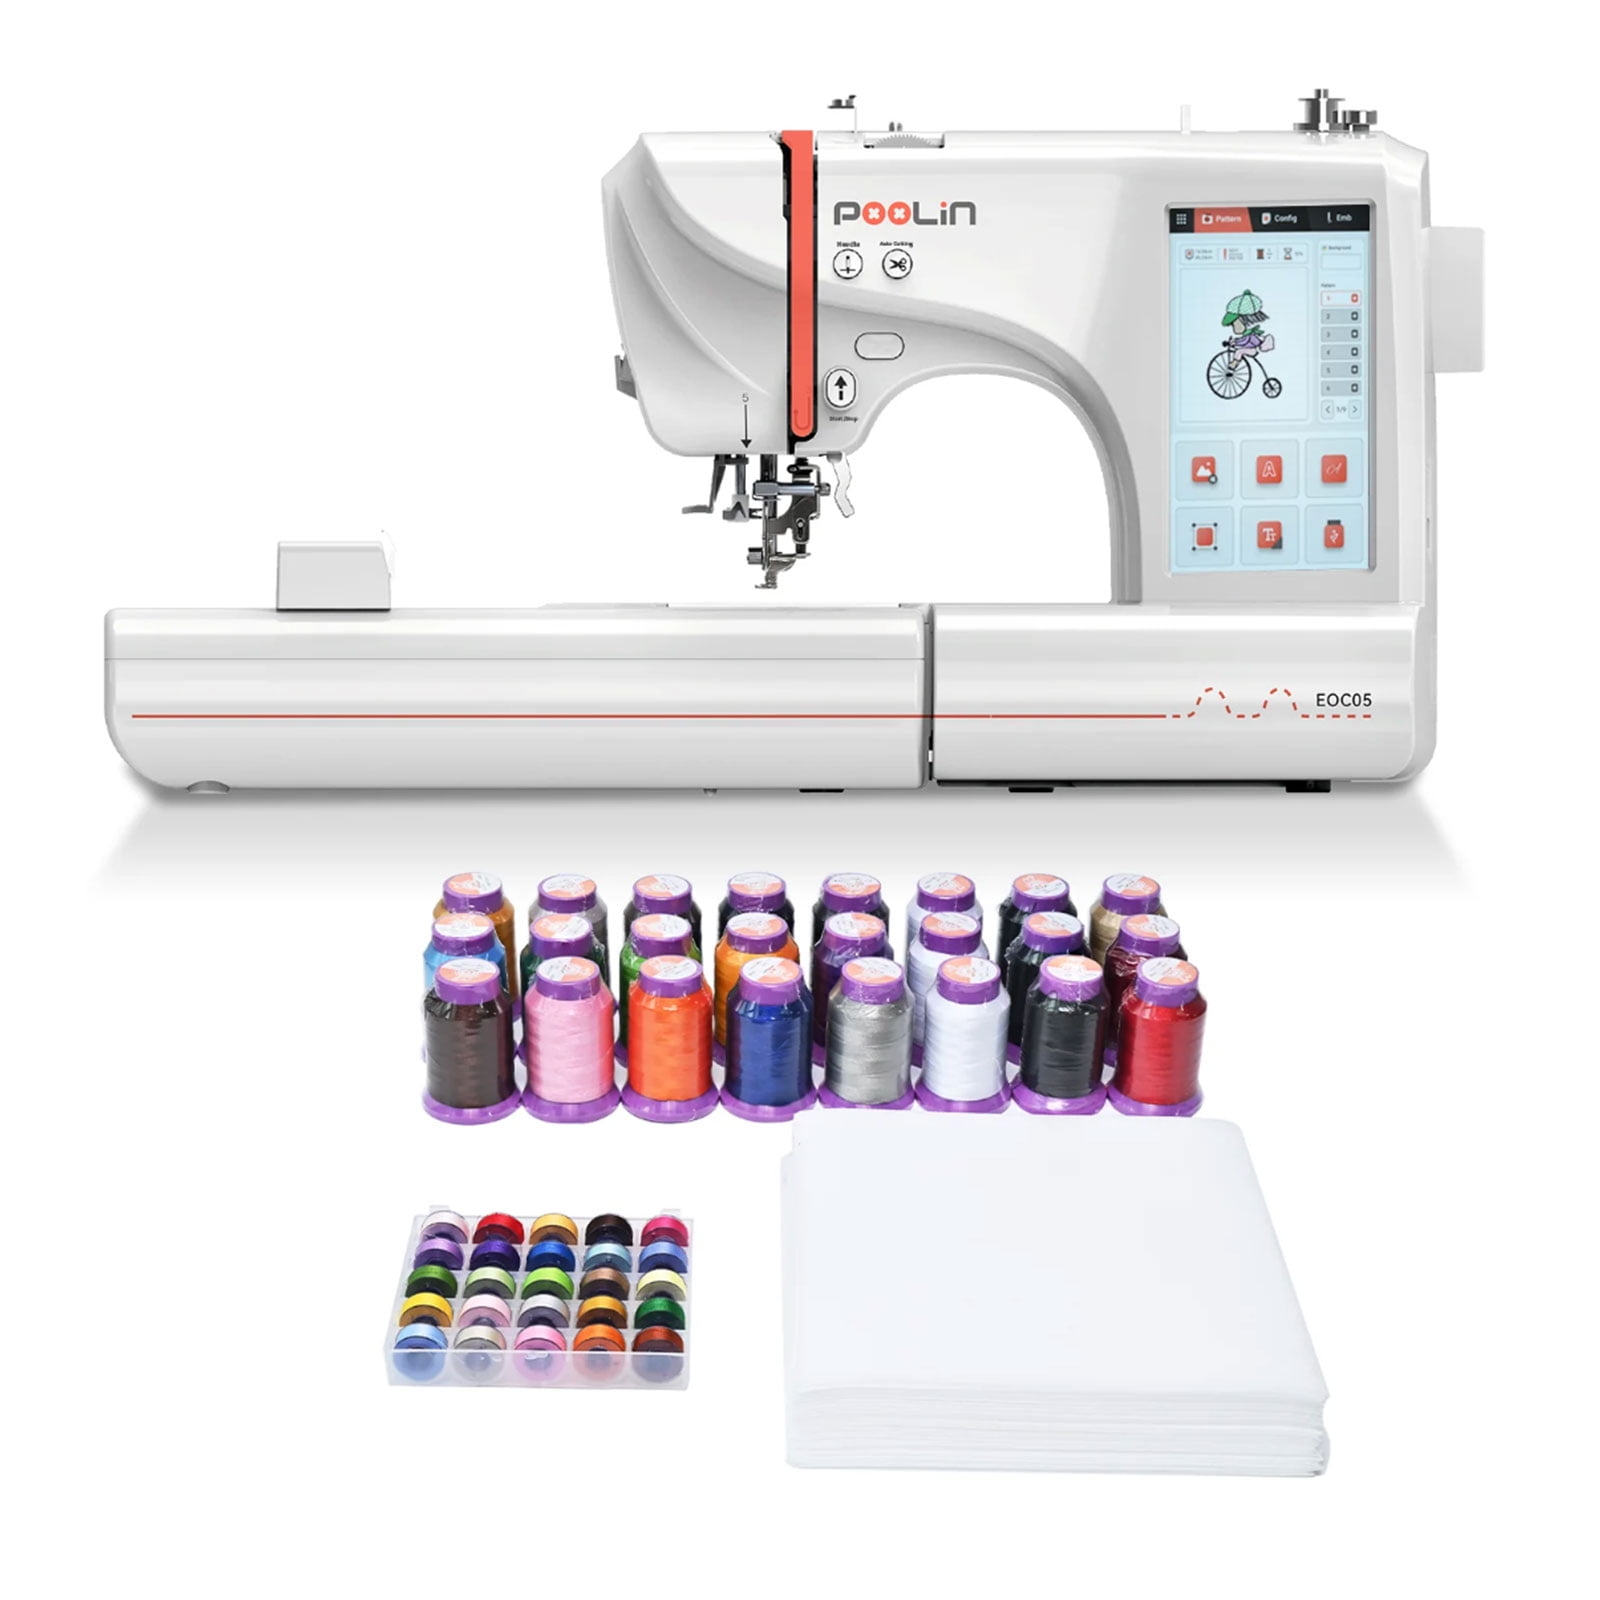 Wholesale brother pe800 embroidery machine For Your Creativity